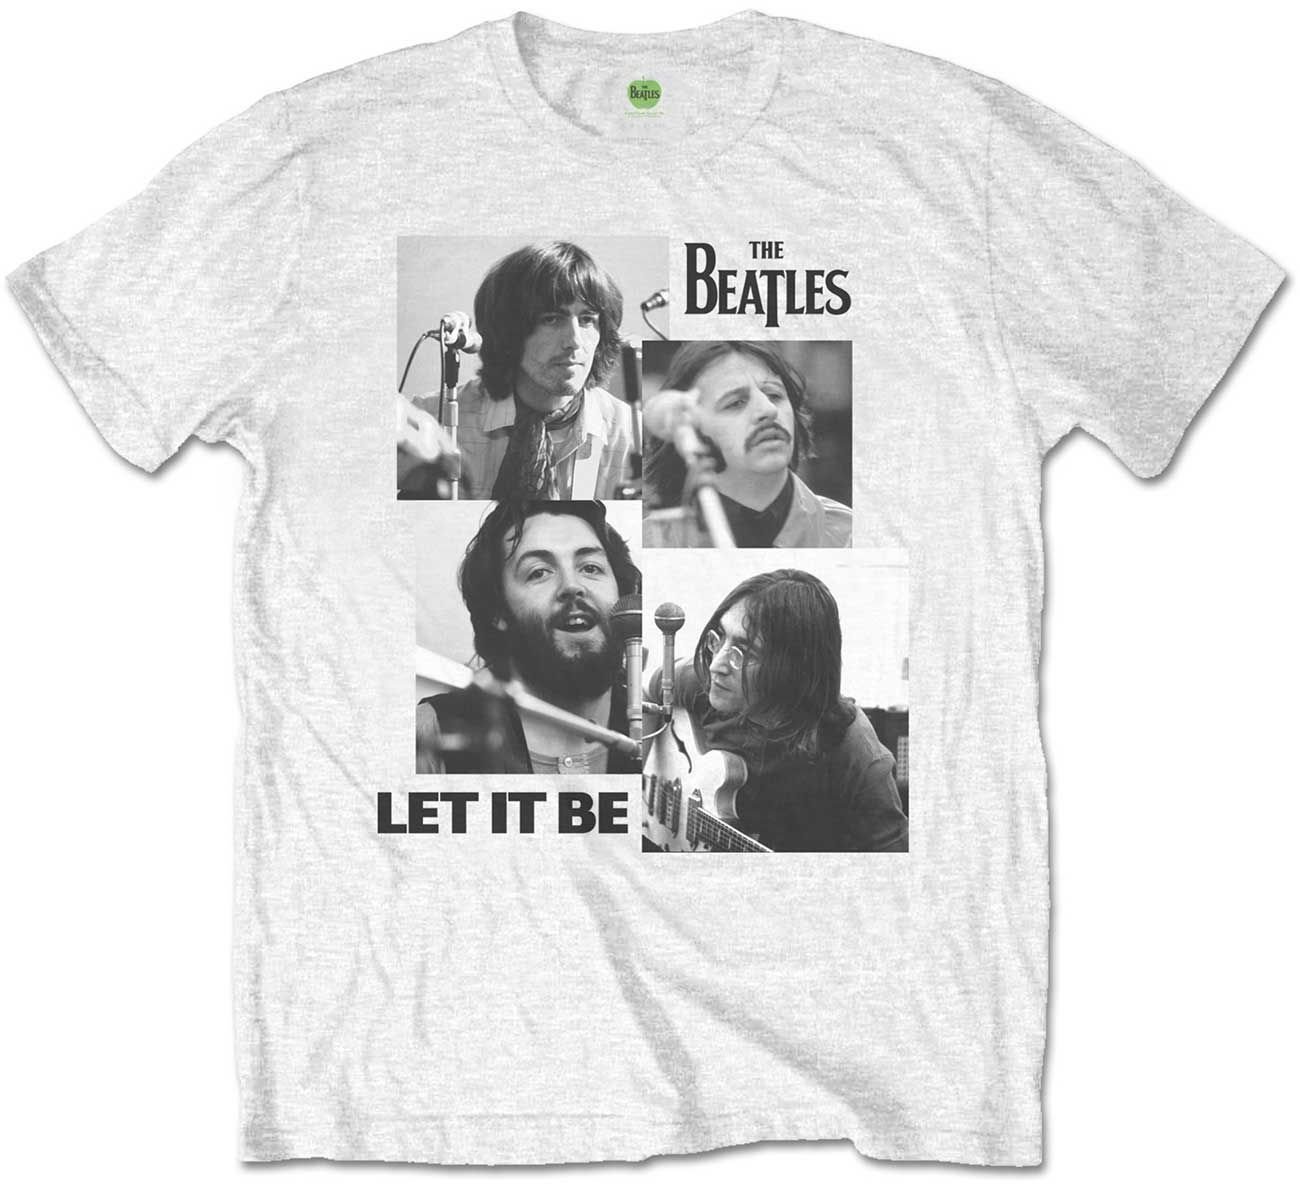 T-Shirt The Beatles T-Shirt Let it Be White 11 - 12 Y